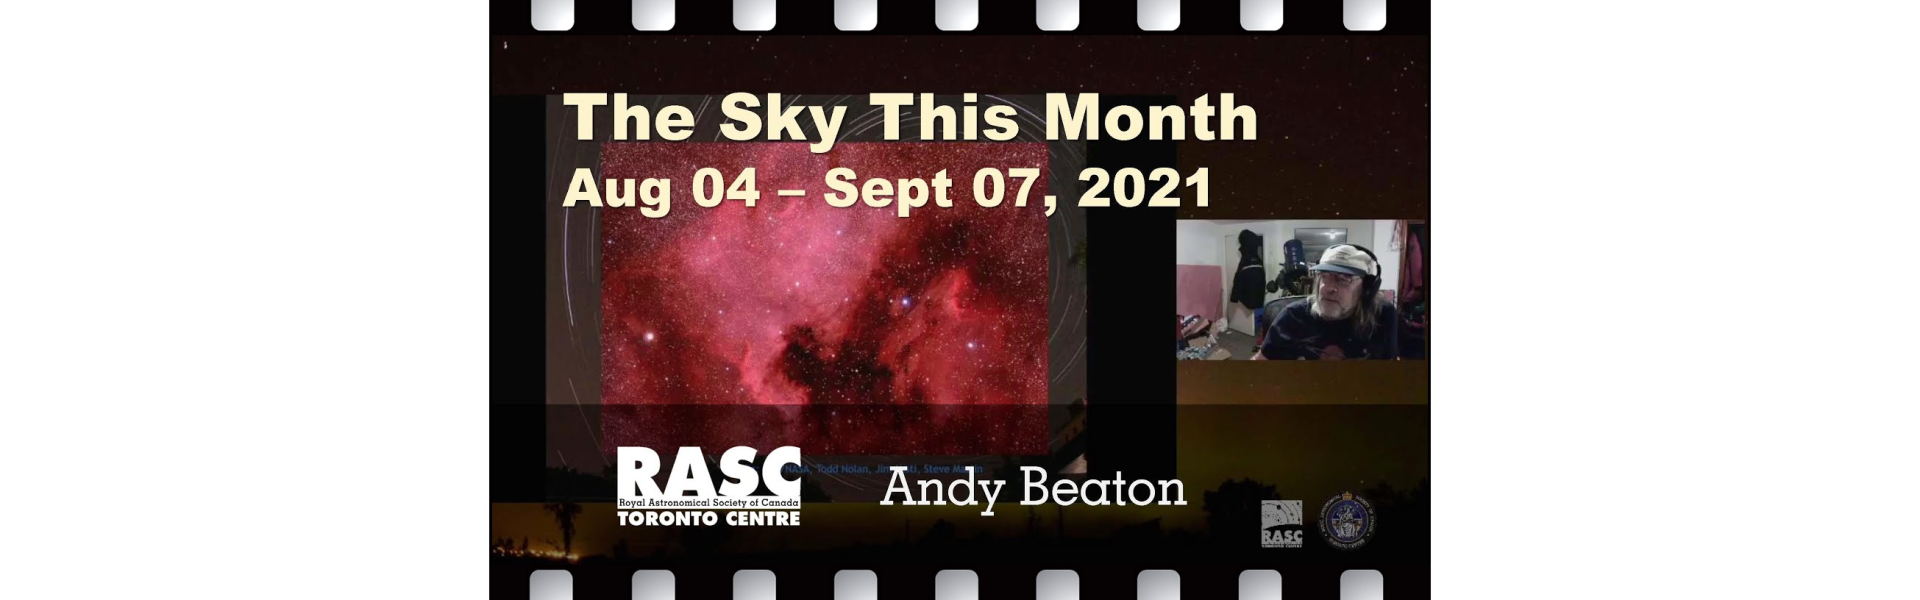 The Sky This Month August 4 - September 7, 2021